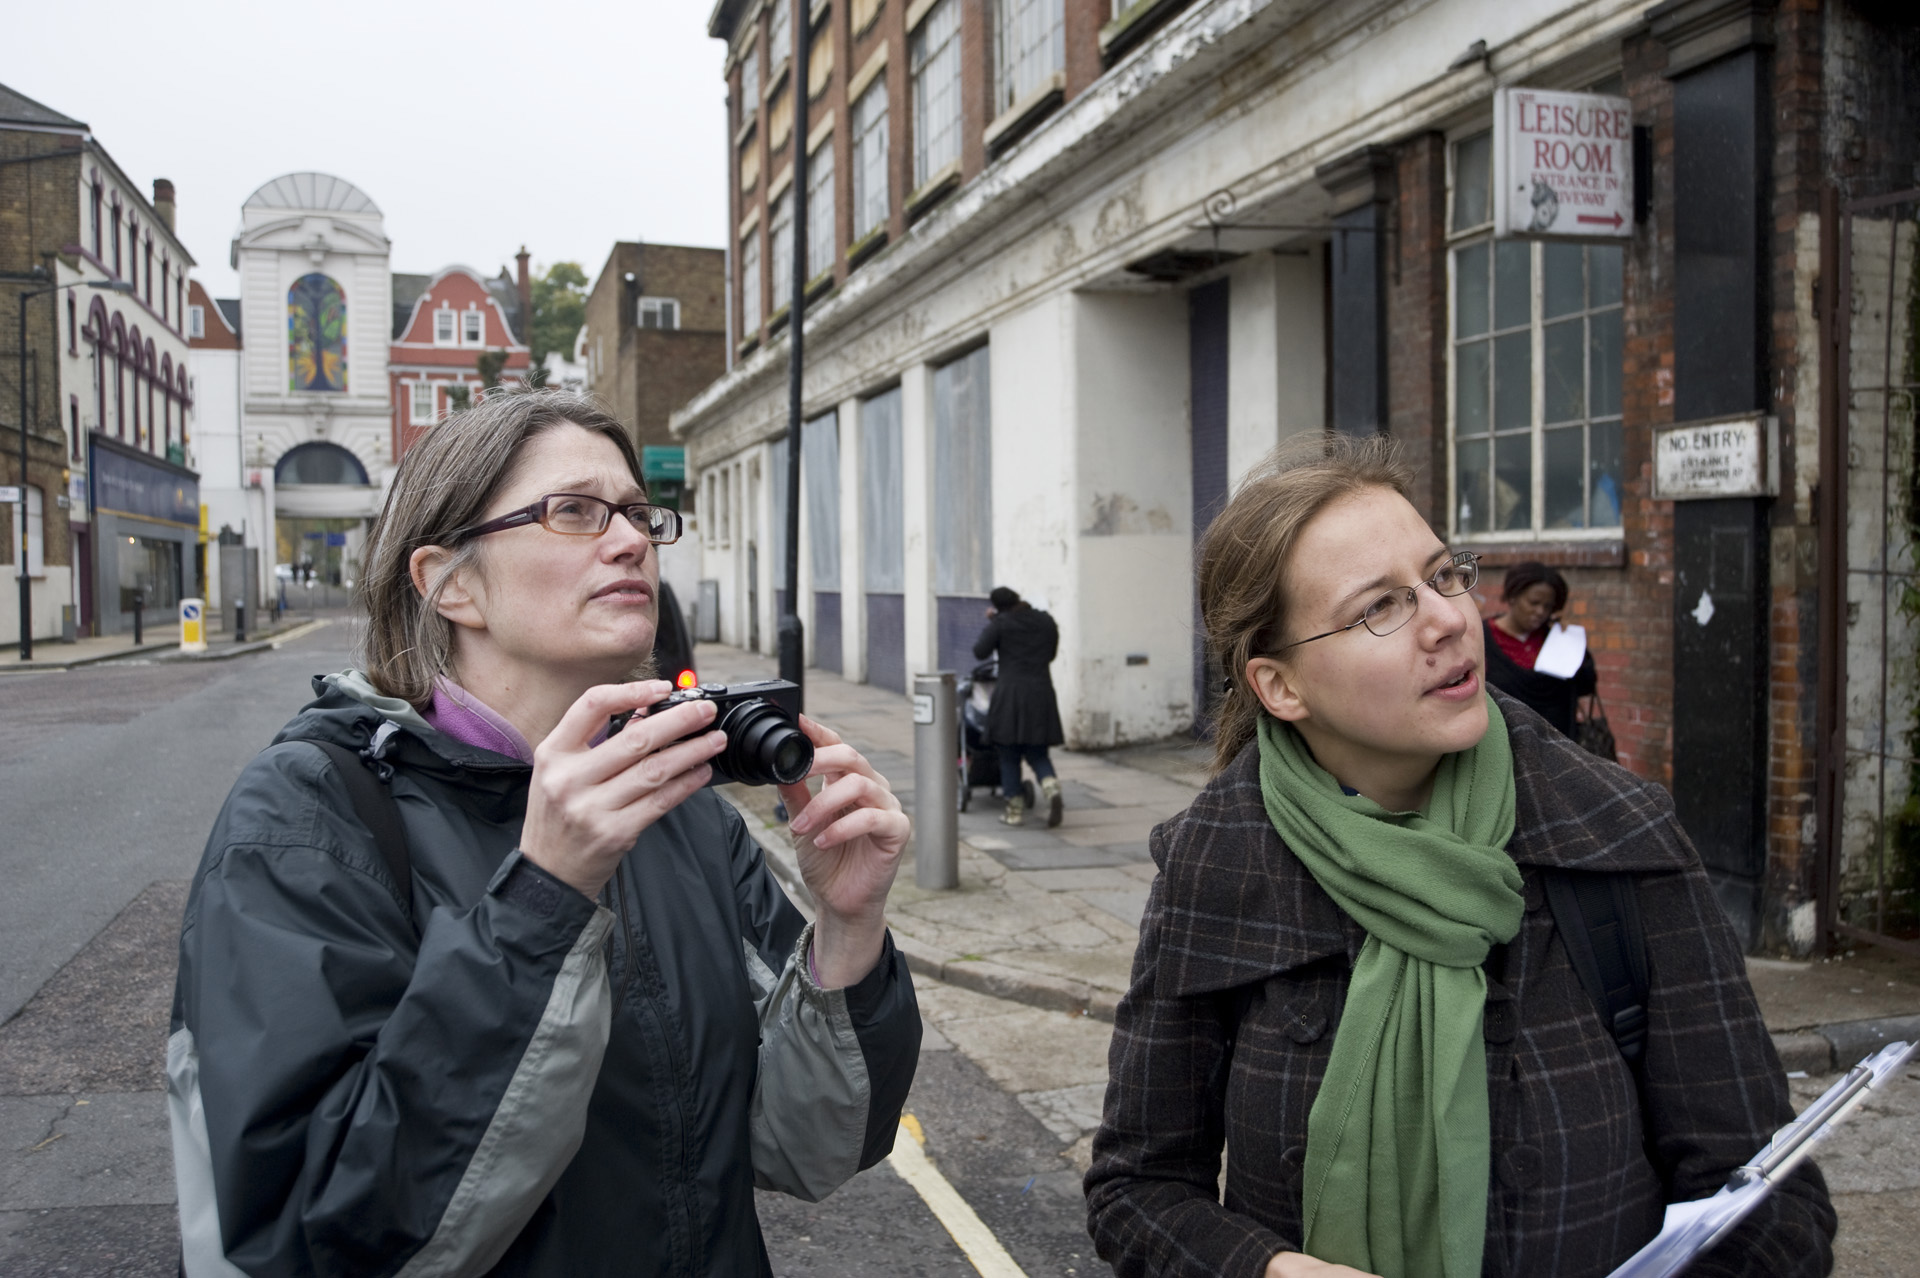 Two women carrying out survey in street